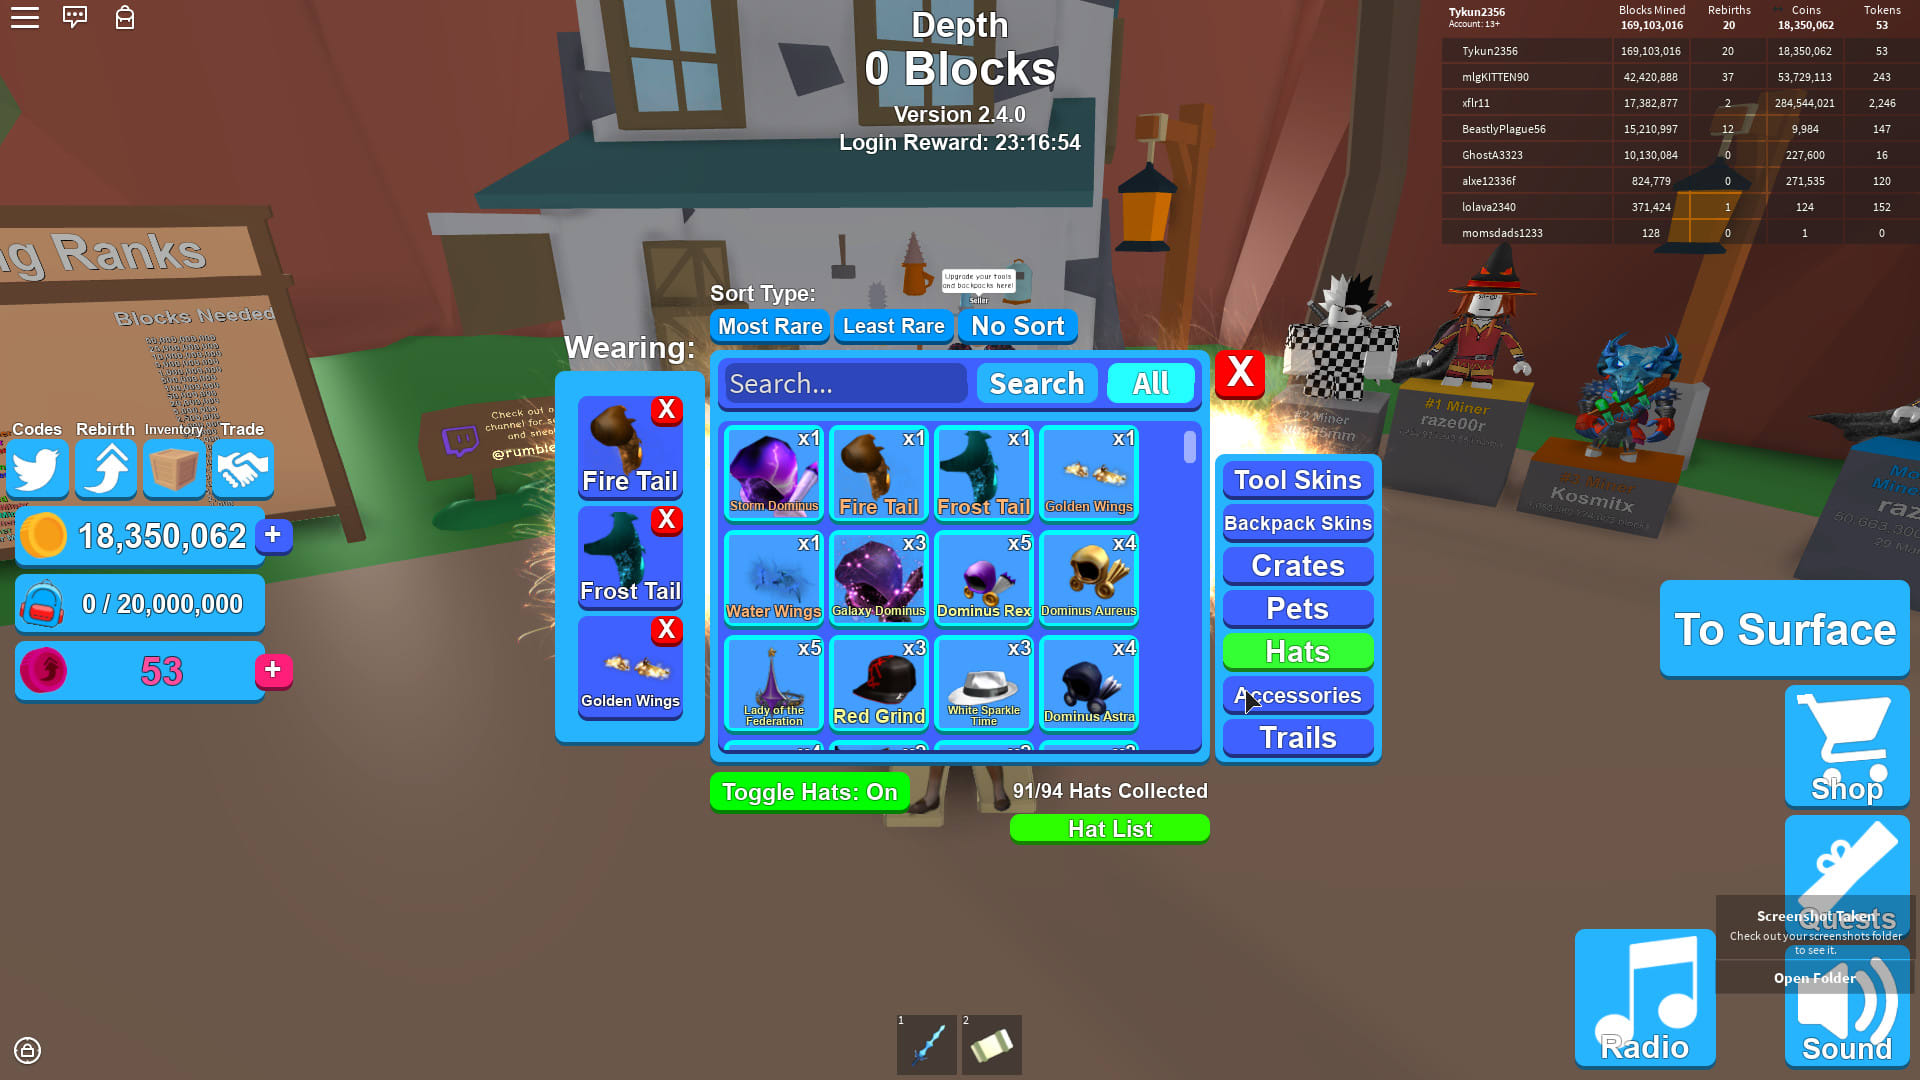 Roblox How To Sell Items In Game Get 25 Robux - roblox fun mmorpg games